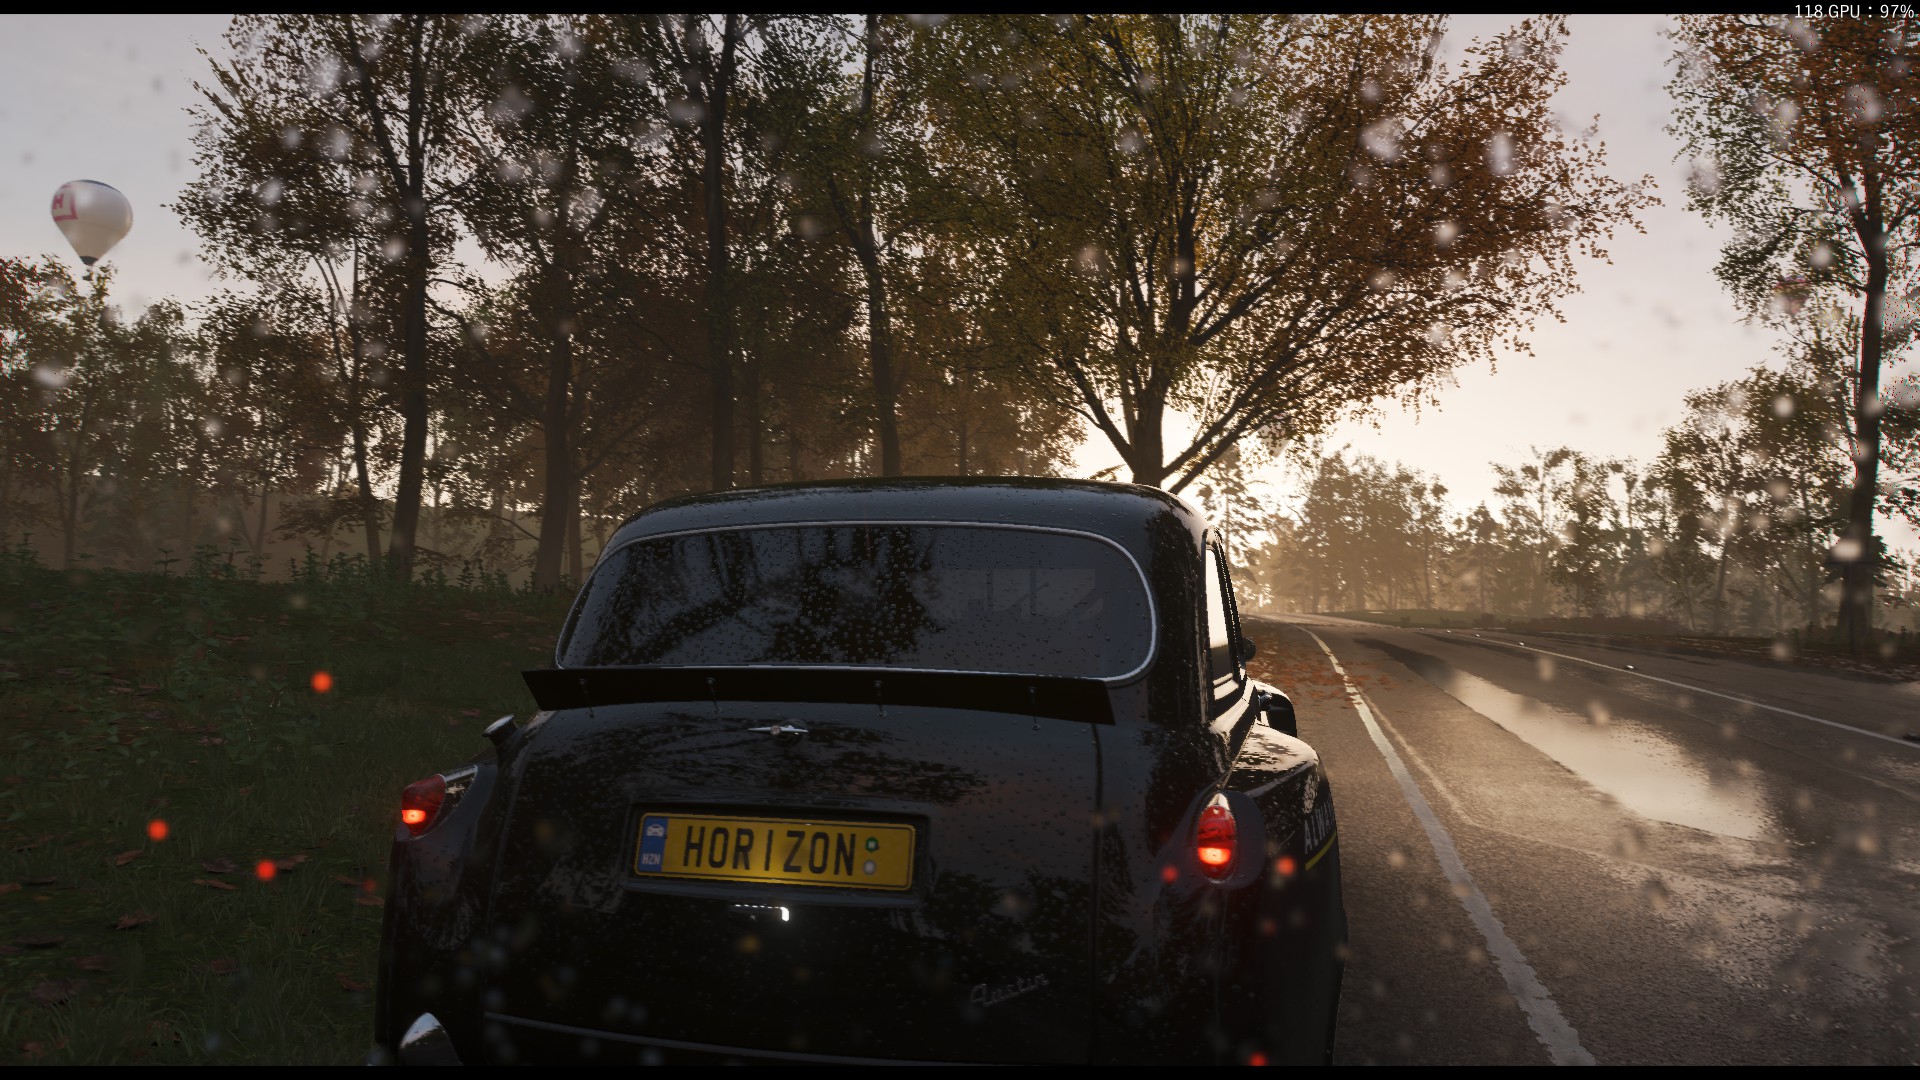 Forza Horizon 4 Landscape Video Games Sunlight Licence Plates Rear View Trees Road CGi Taillights Ca 1920x1080